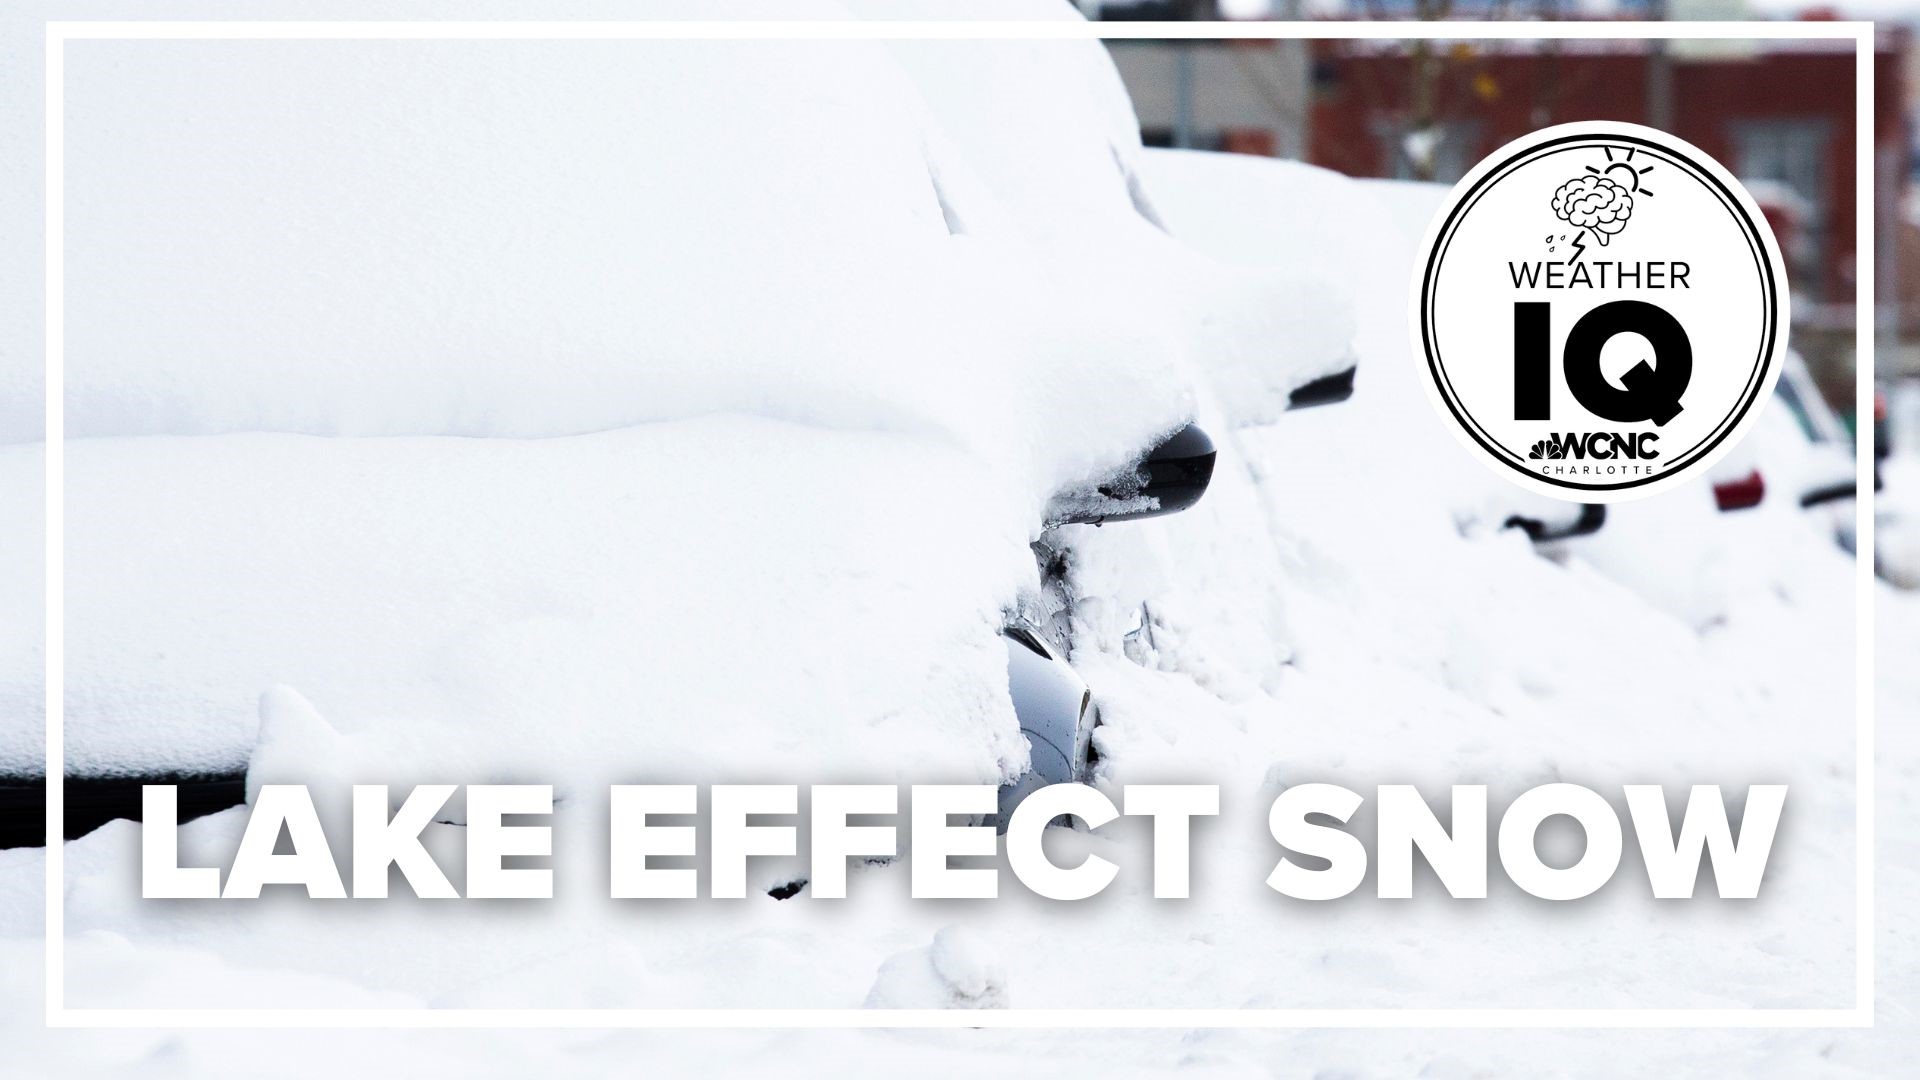 The lake effect snow dumped over 70 inches near Buffalo, New York. Meteorologist Chris Mulcahy explains what creates the "lake effect" during a winter storm.